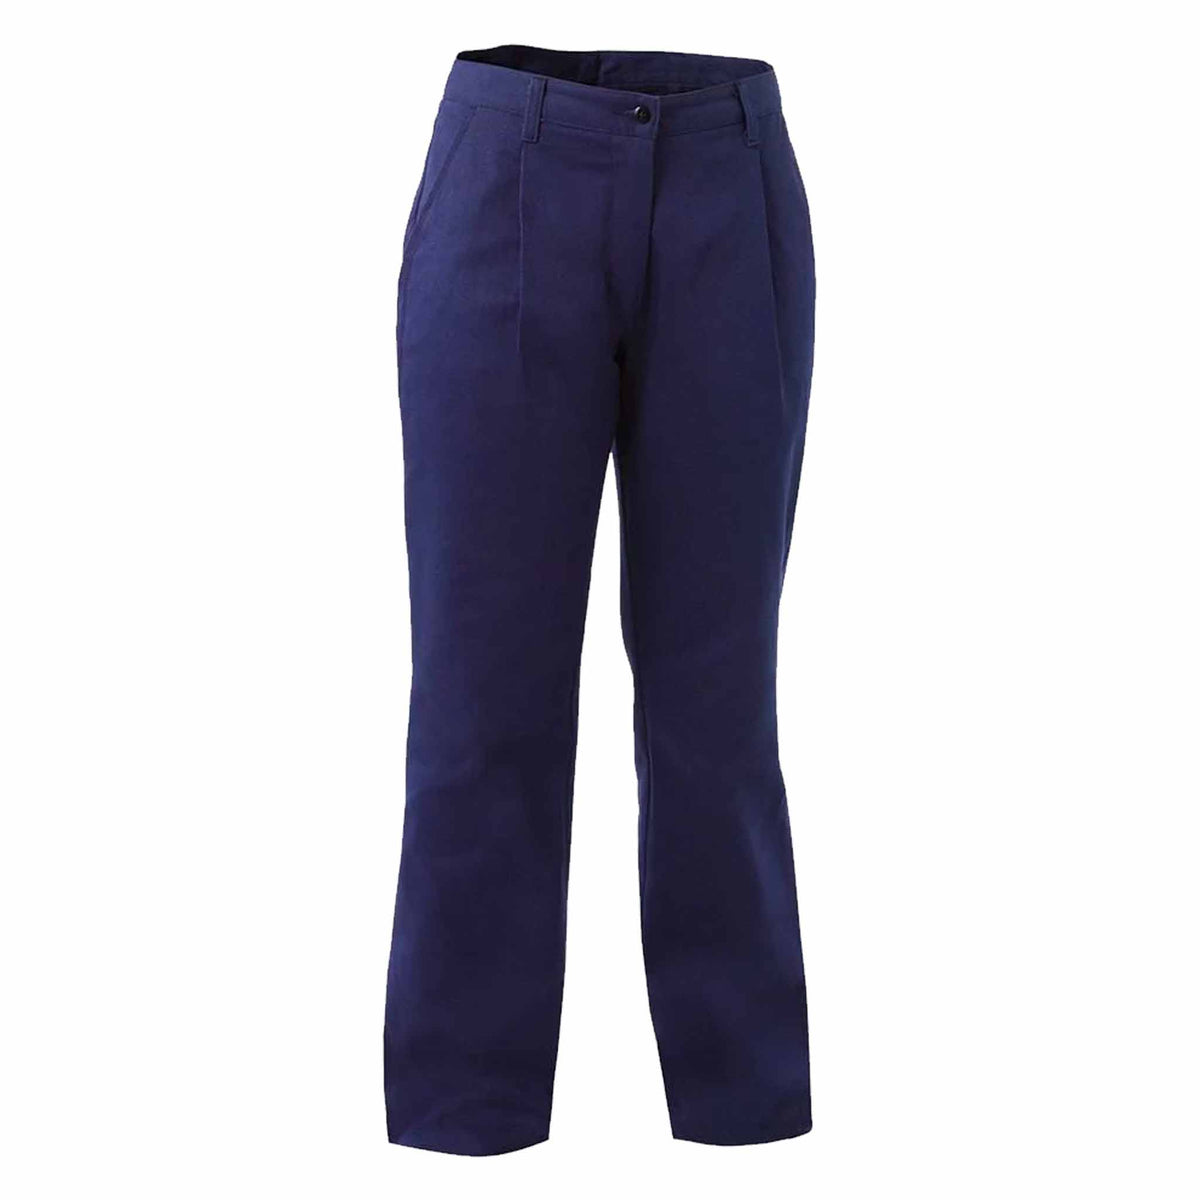 king gee navy womens drill pants